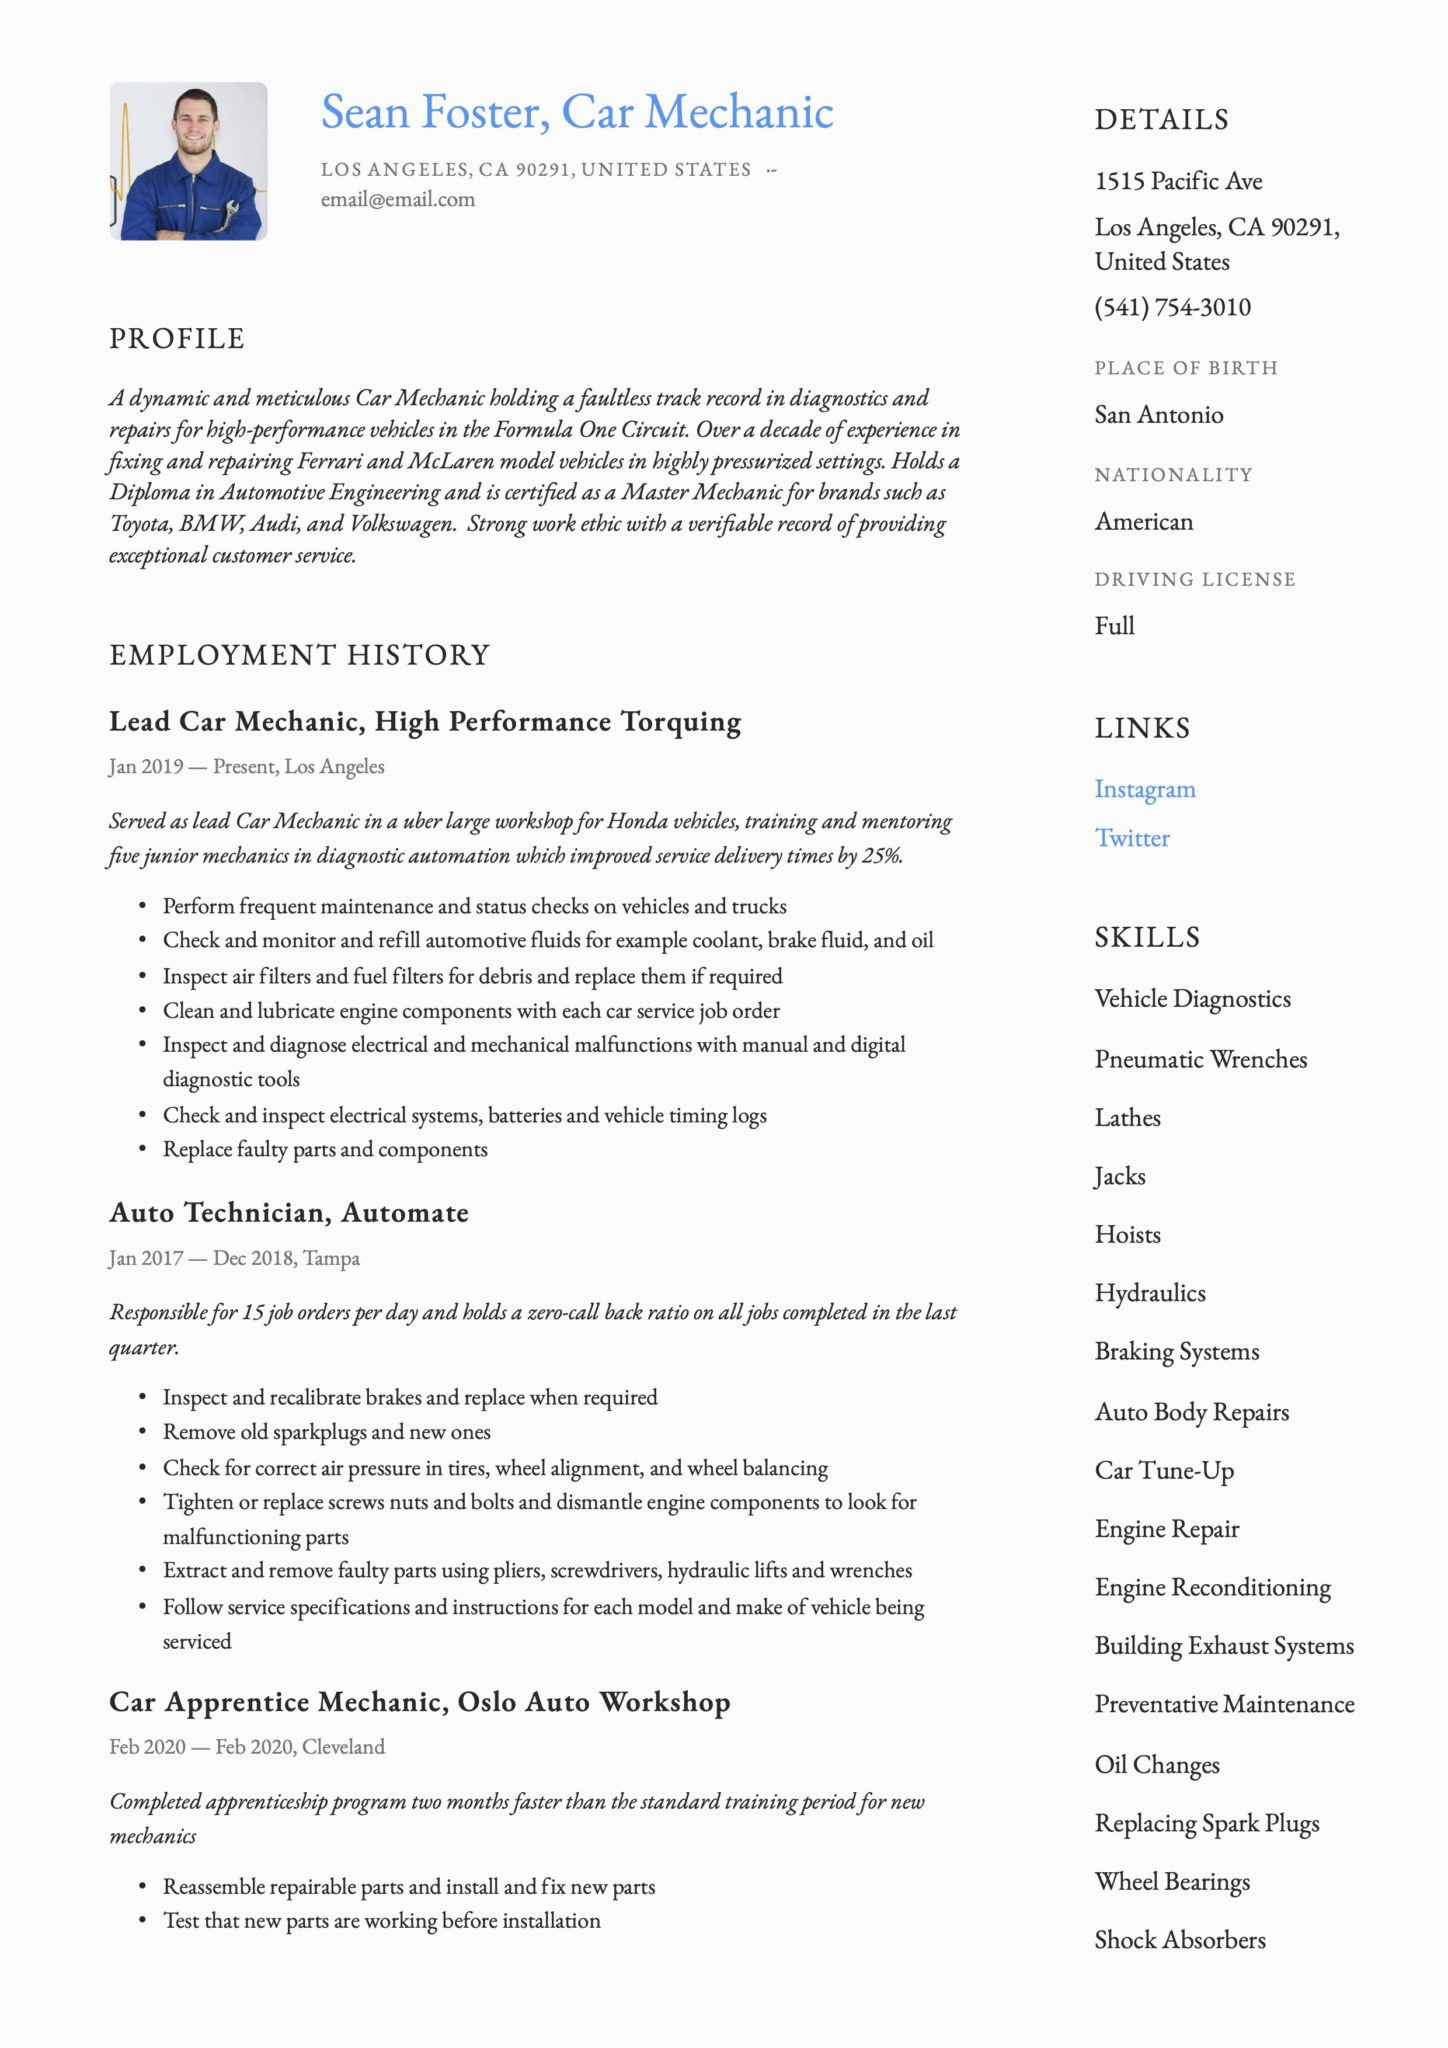 Auto Mechanic with 10 Years Plus Experience Sample Resumes Car Mechanic Resume & Guide 19 Resume Examples